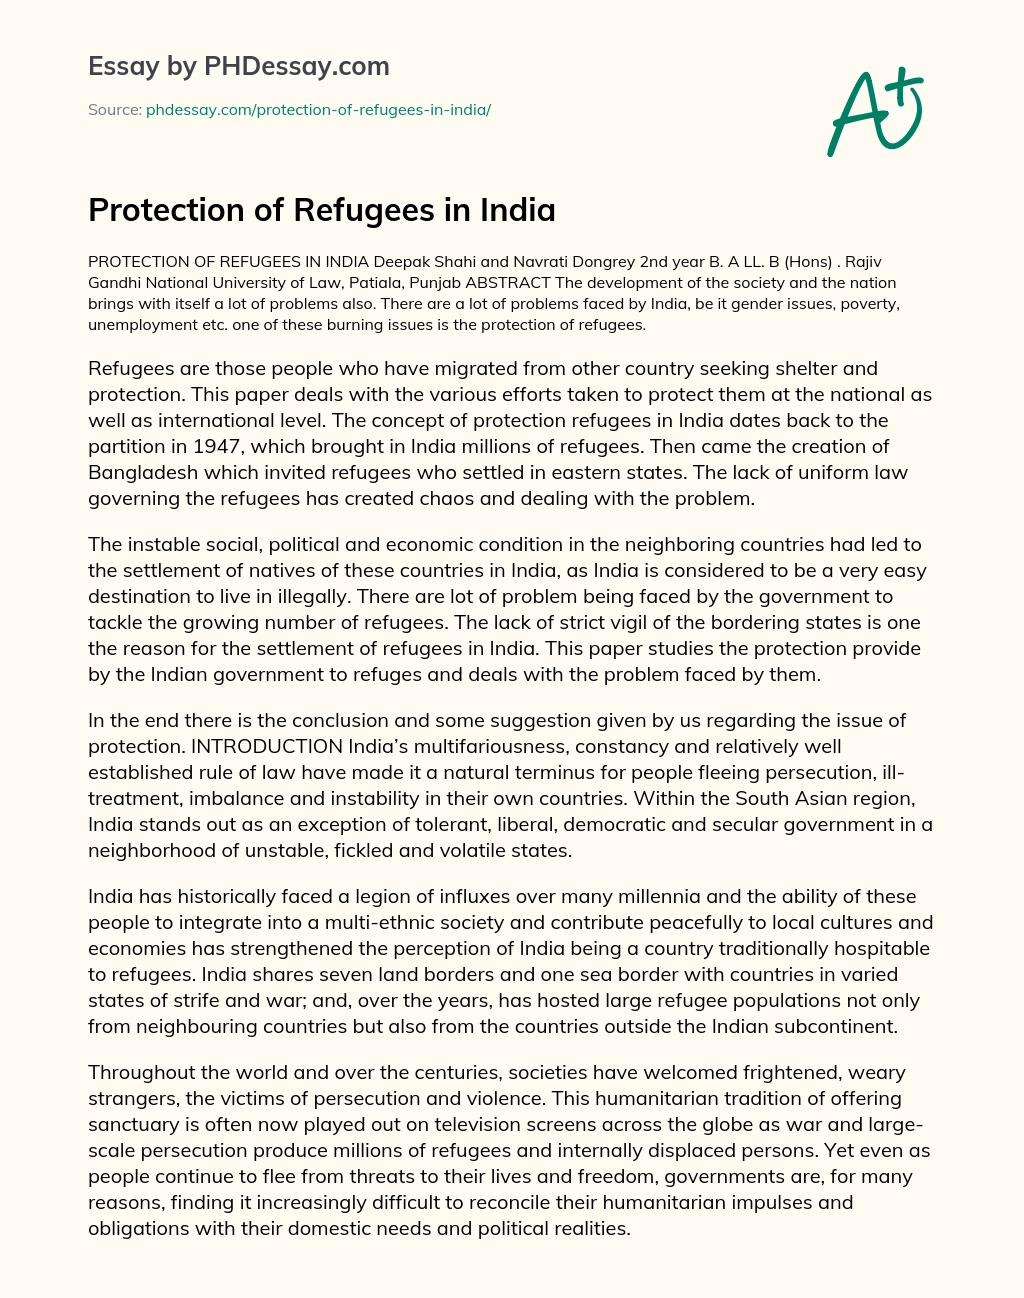 Protection of Refugees in India essay